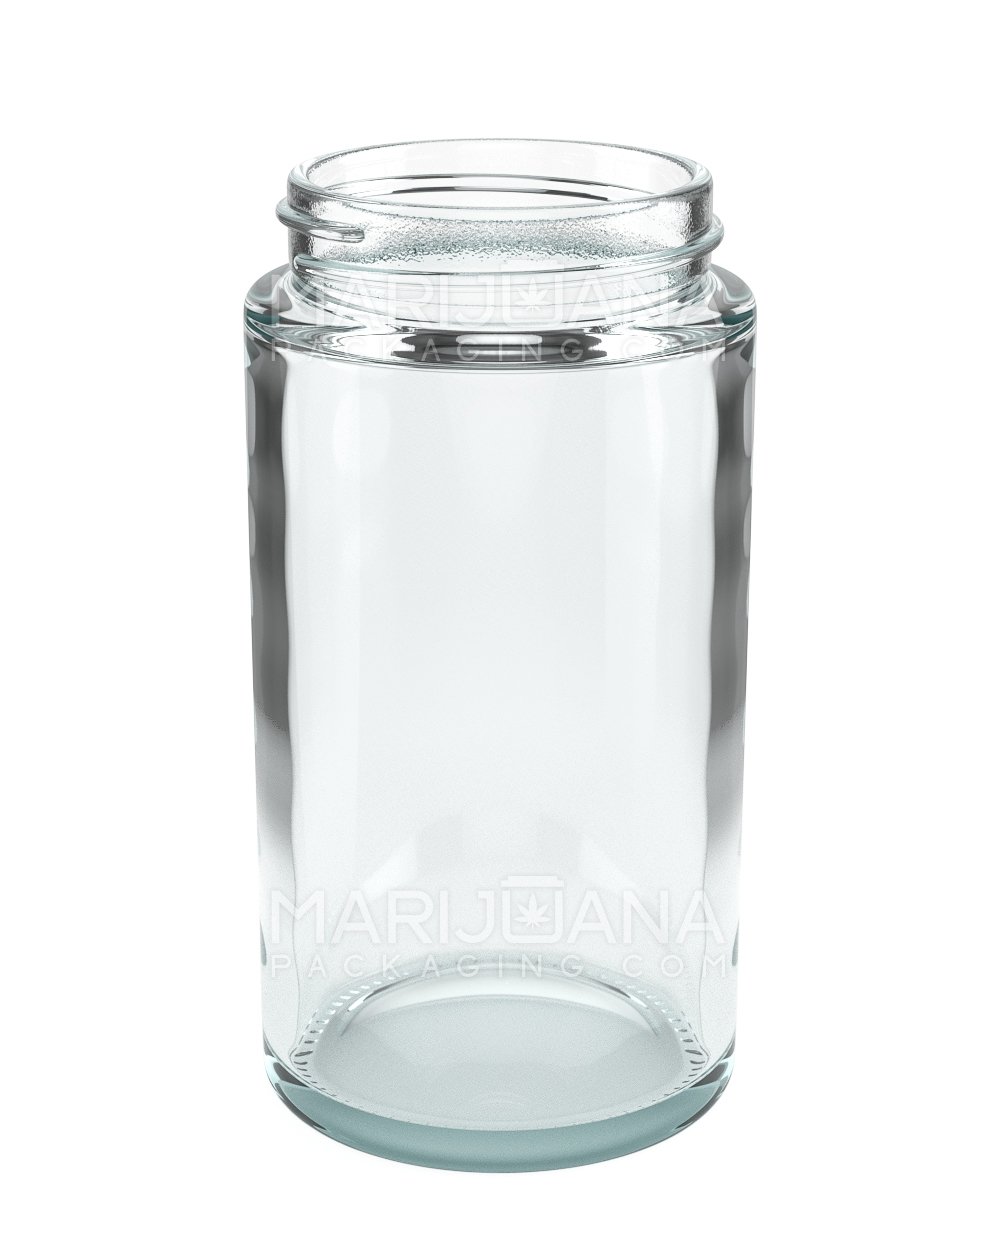 Straight Sided Clear Glass Jars | 50mm - 6oz - 80 Count - 2